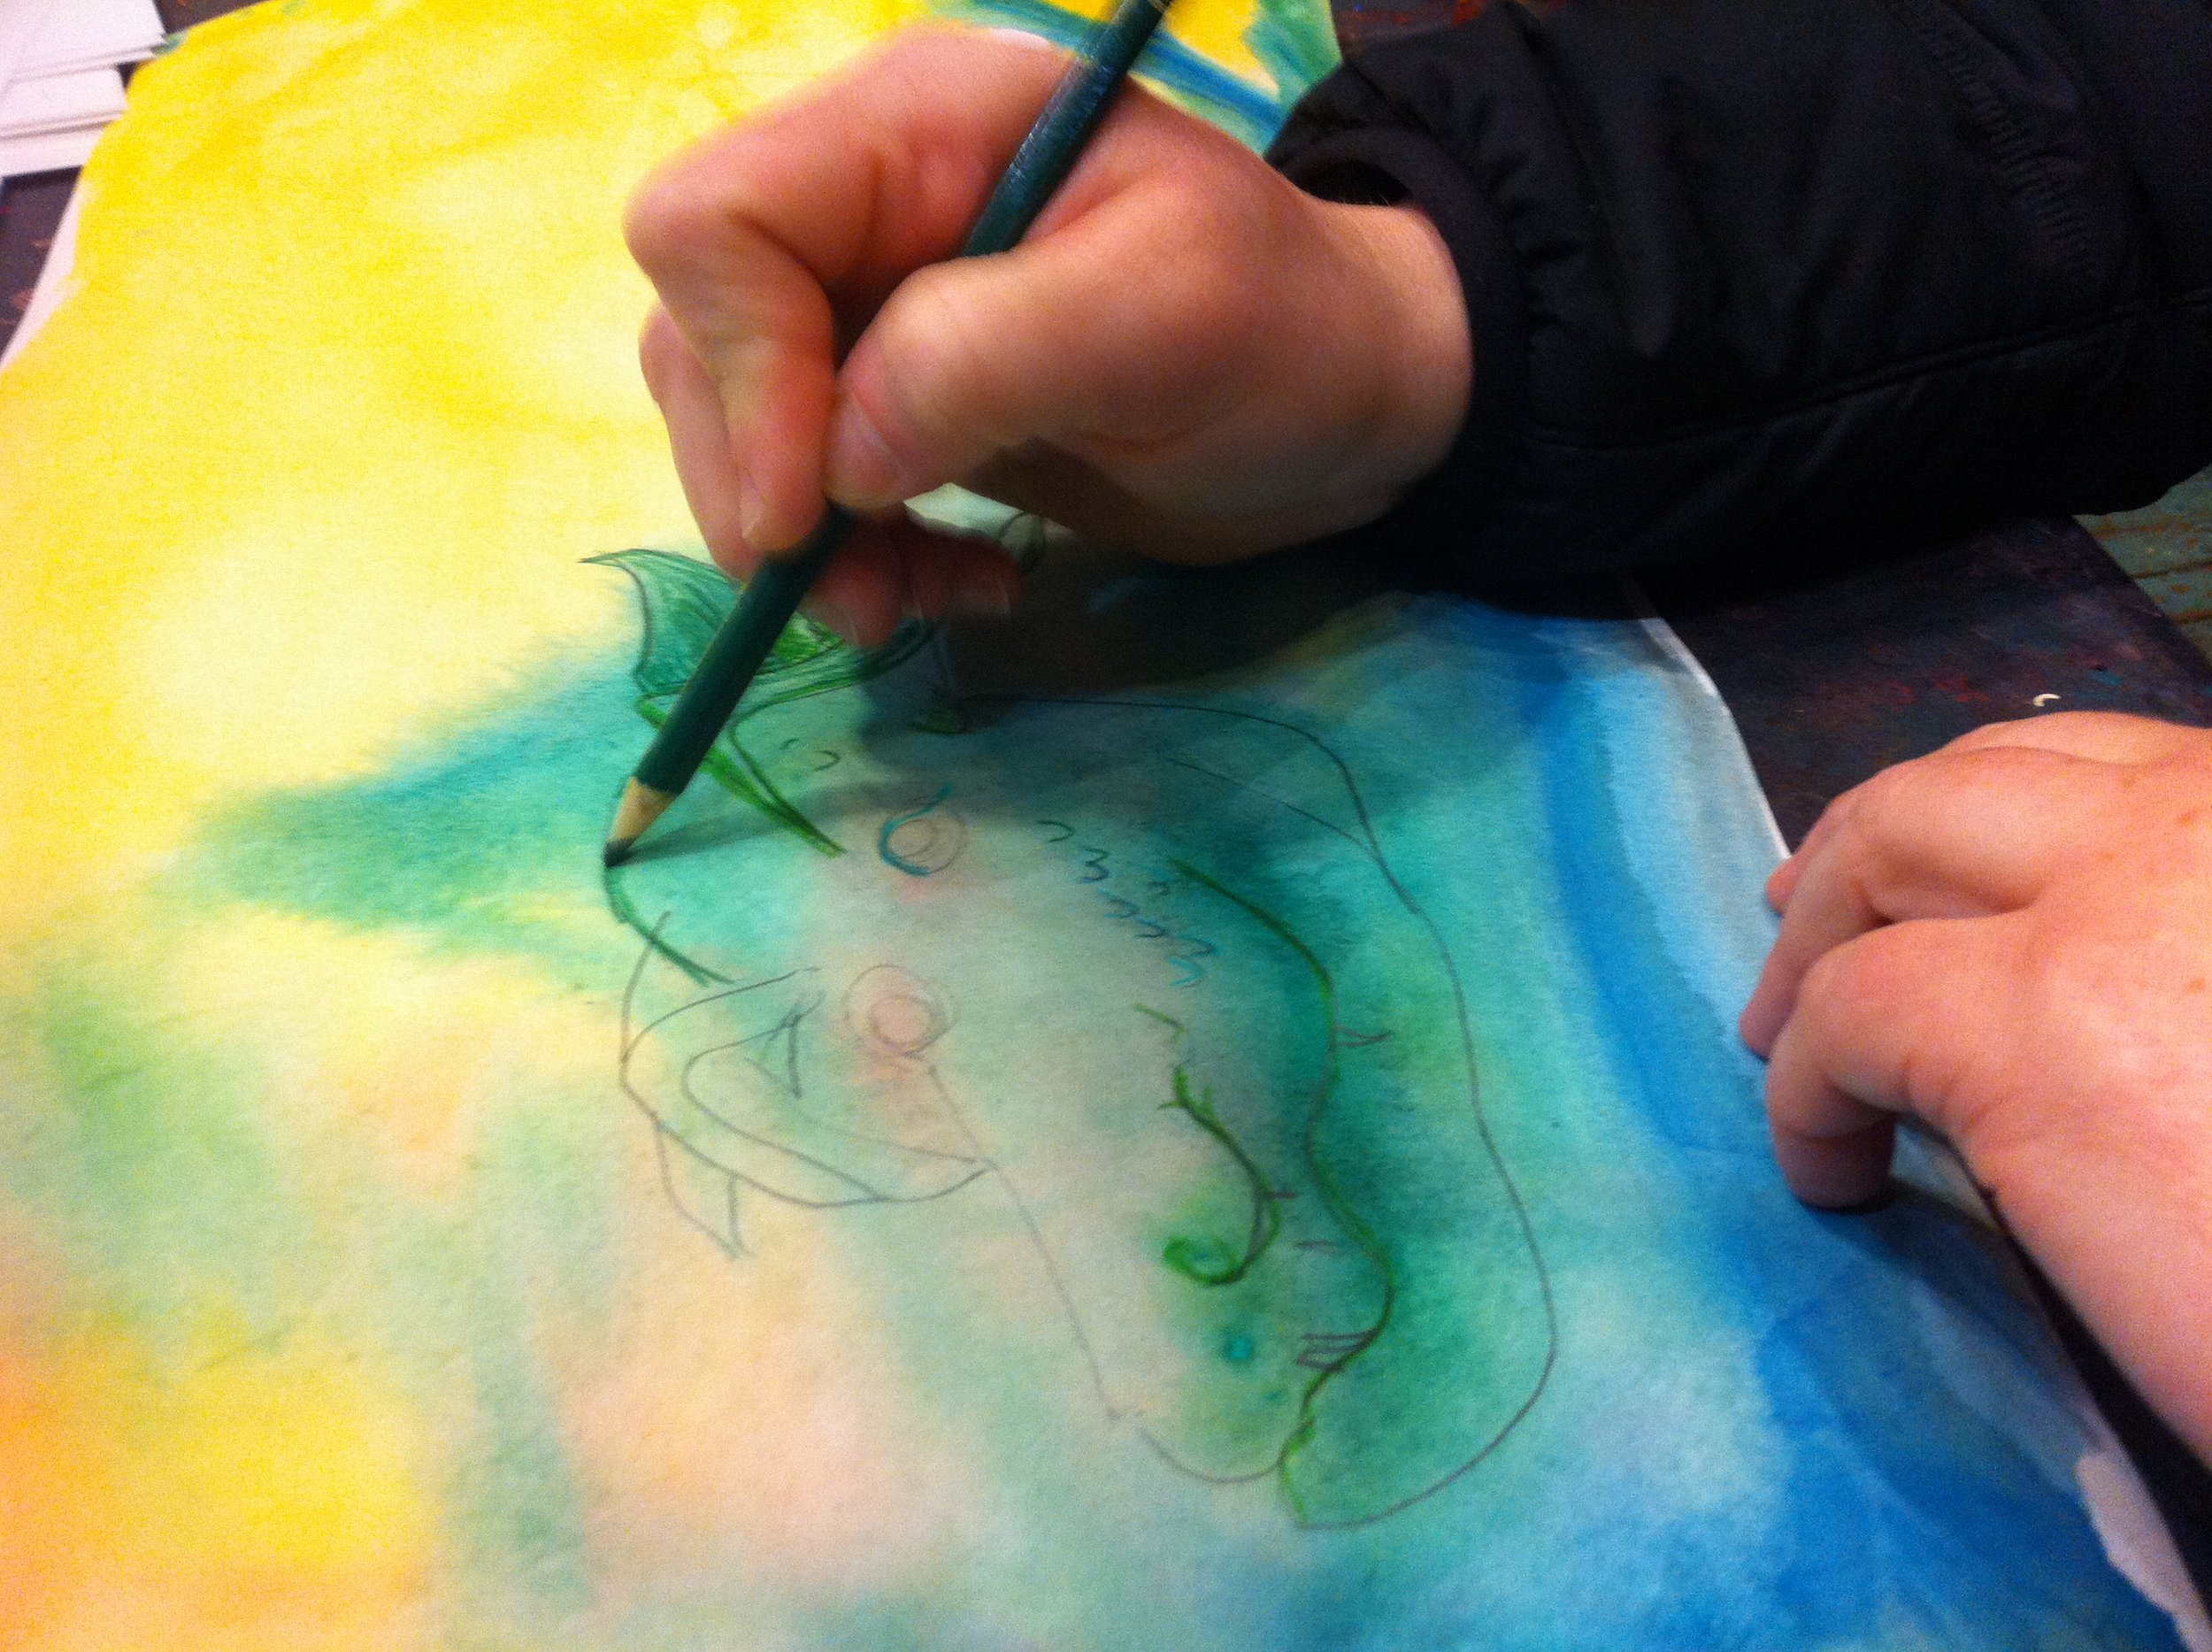 Drawing and Painting Art Classes for Teens - The Artist Lab + Education